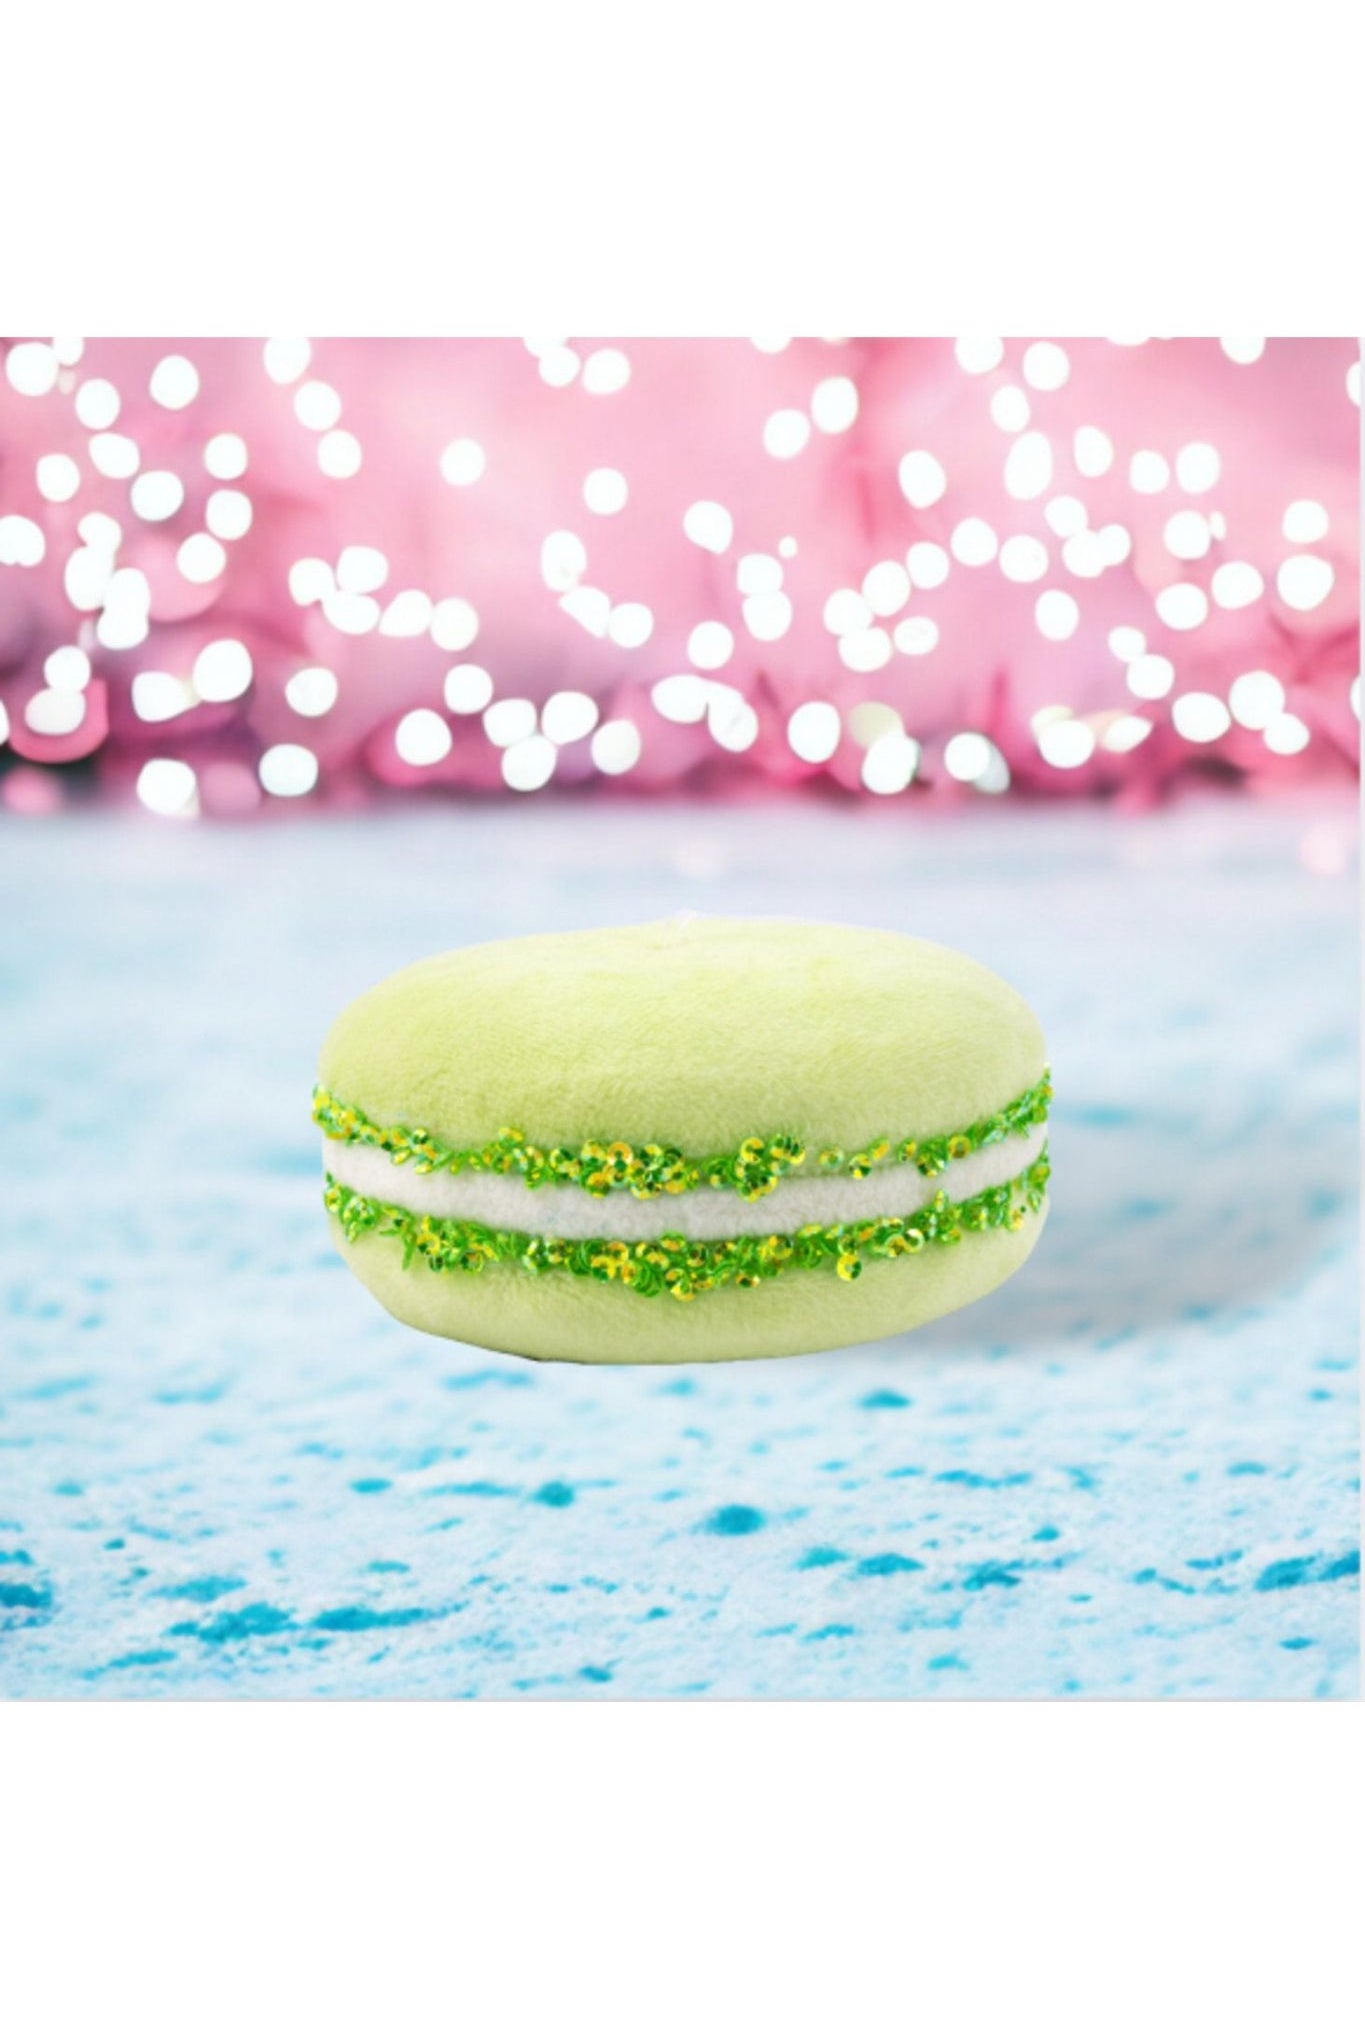 Shop For 4" Macaron Hanging Ornament: Green 08-08876